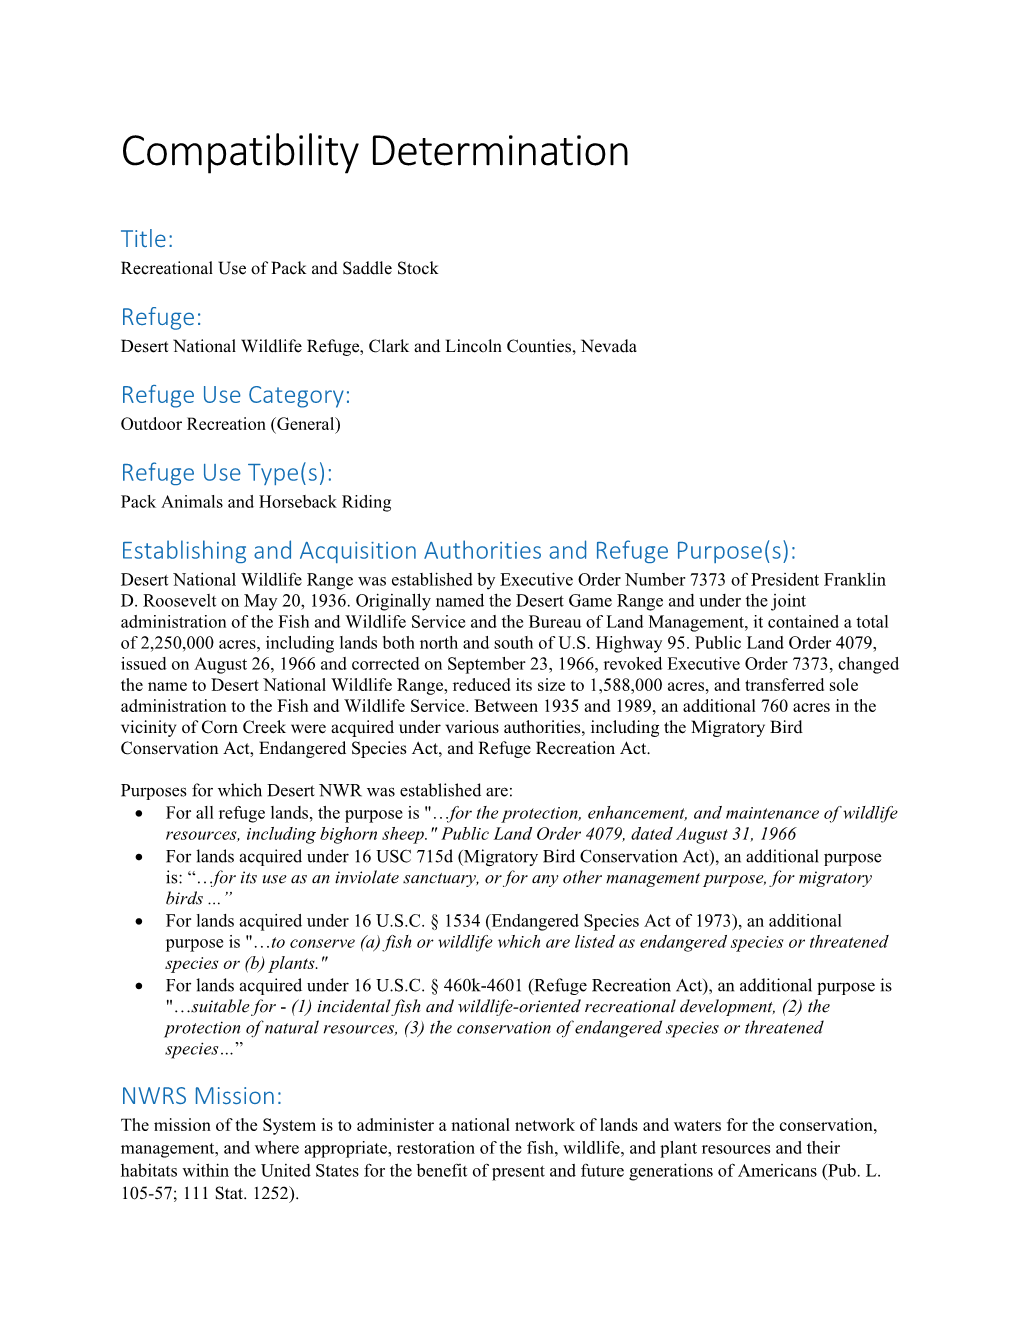 Compatibility Determination for Recreational Use of Pack and Saddle Stock on Desert National Wildlife Refuge, Clark and Lincoln